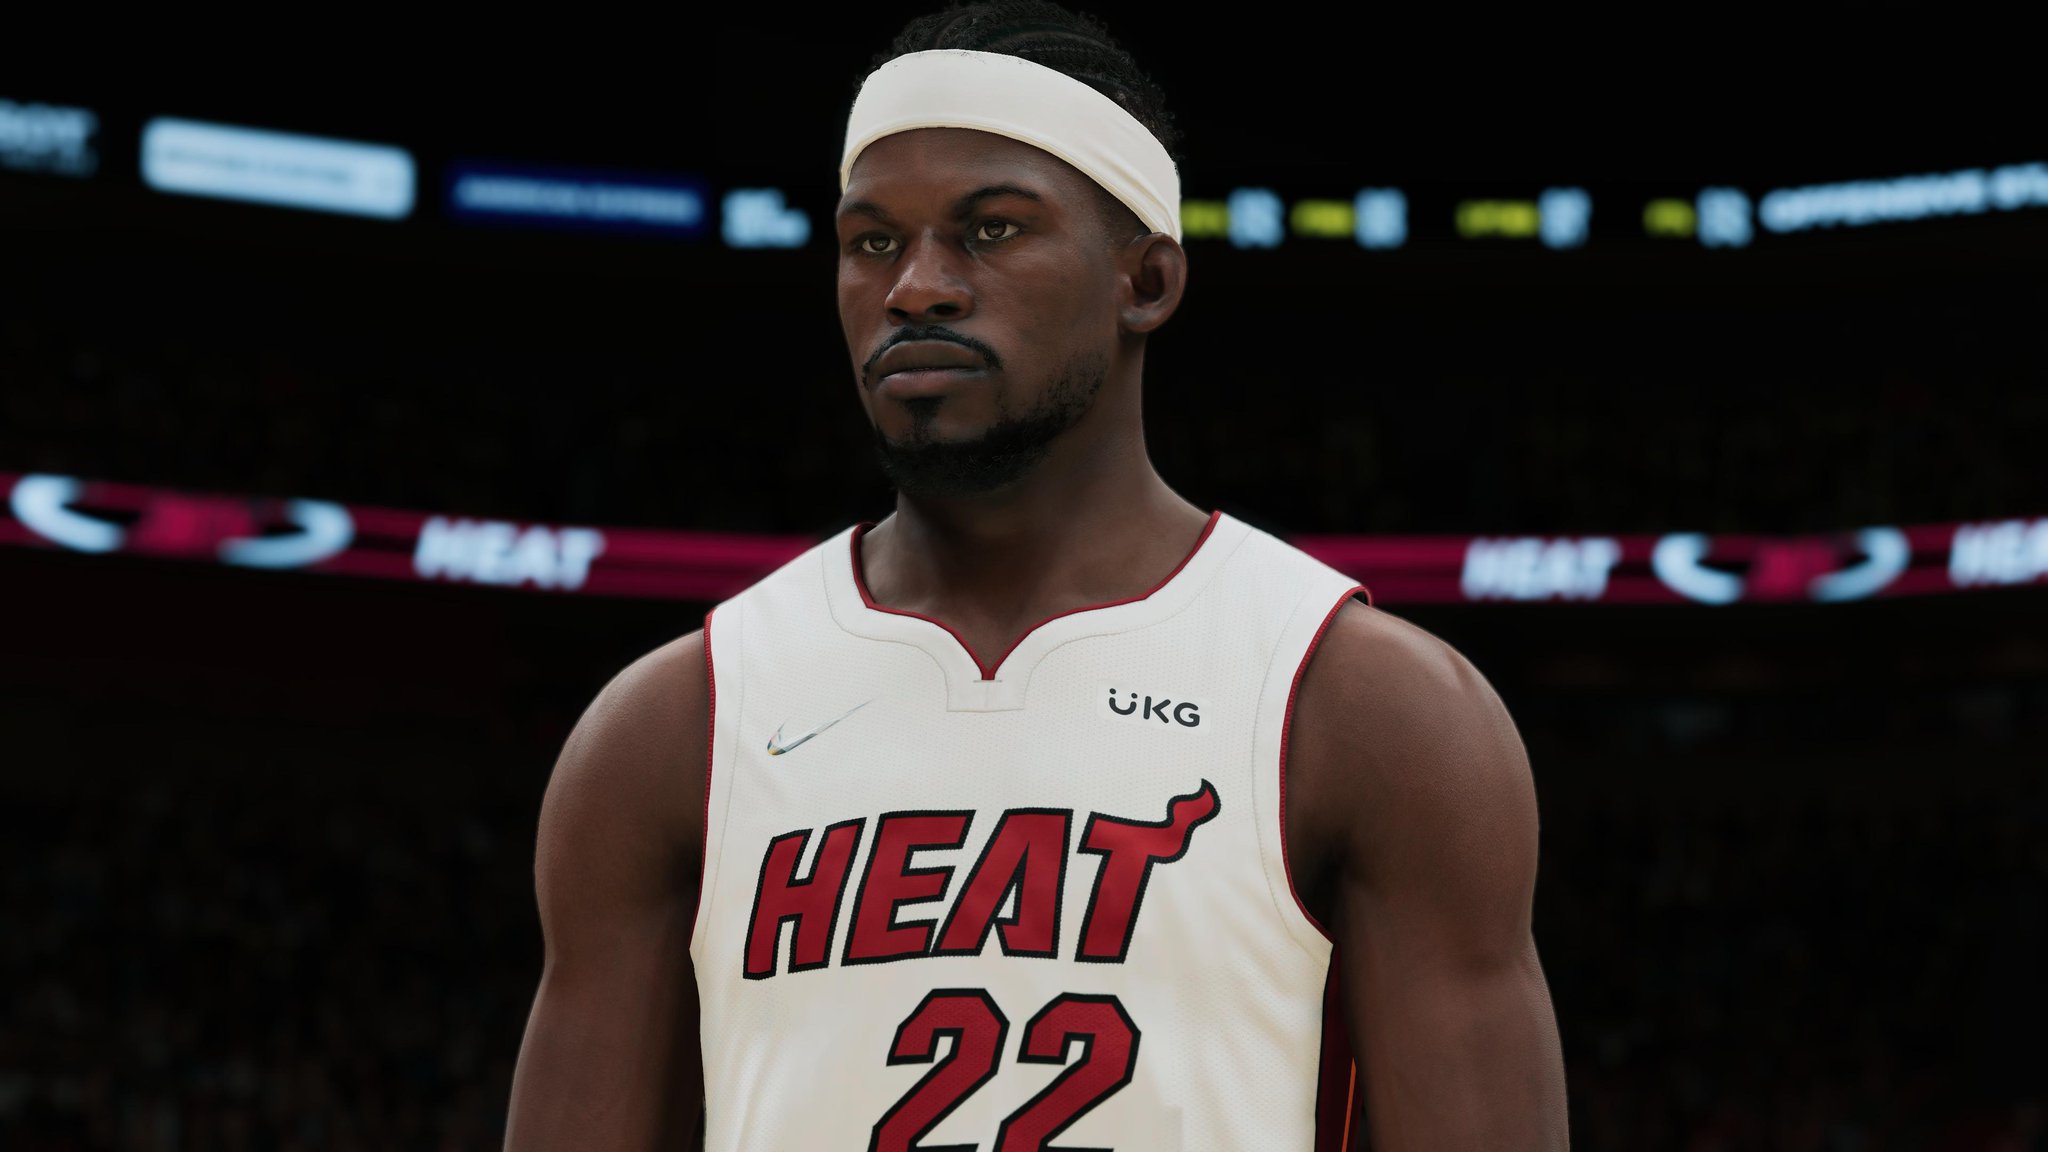 How to make the 2022 Miami Heat City jersey in NBA2K21 